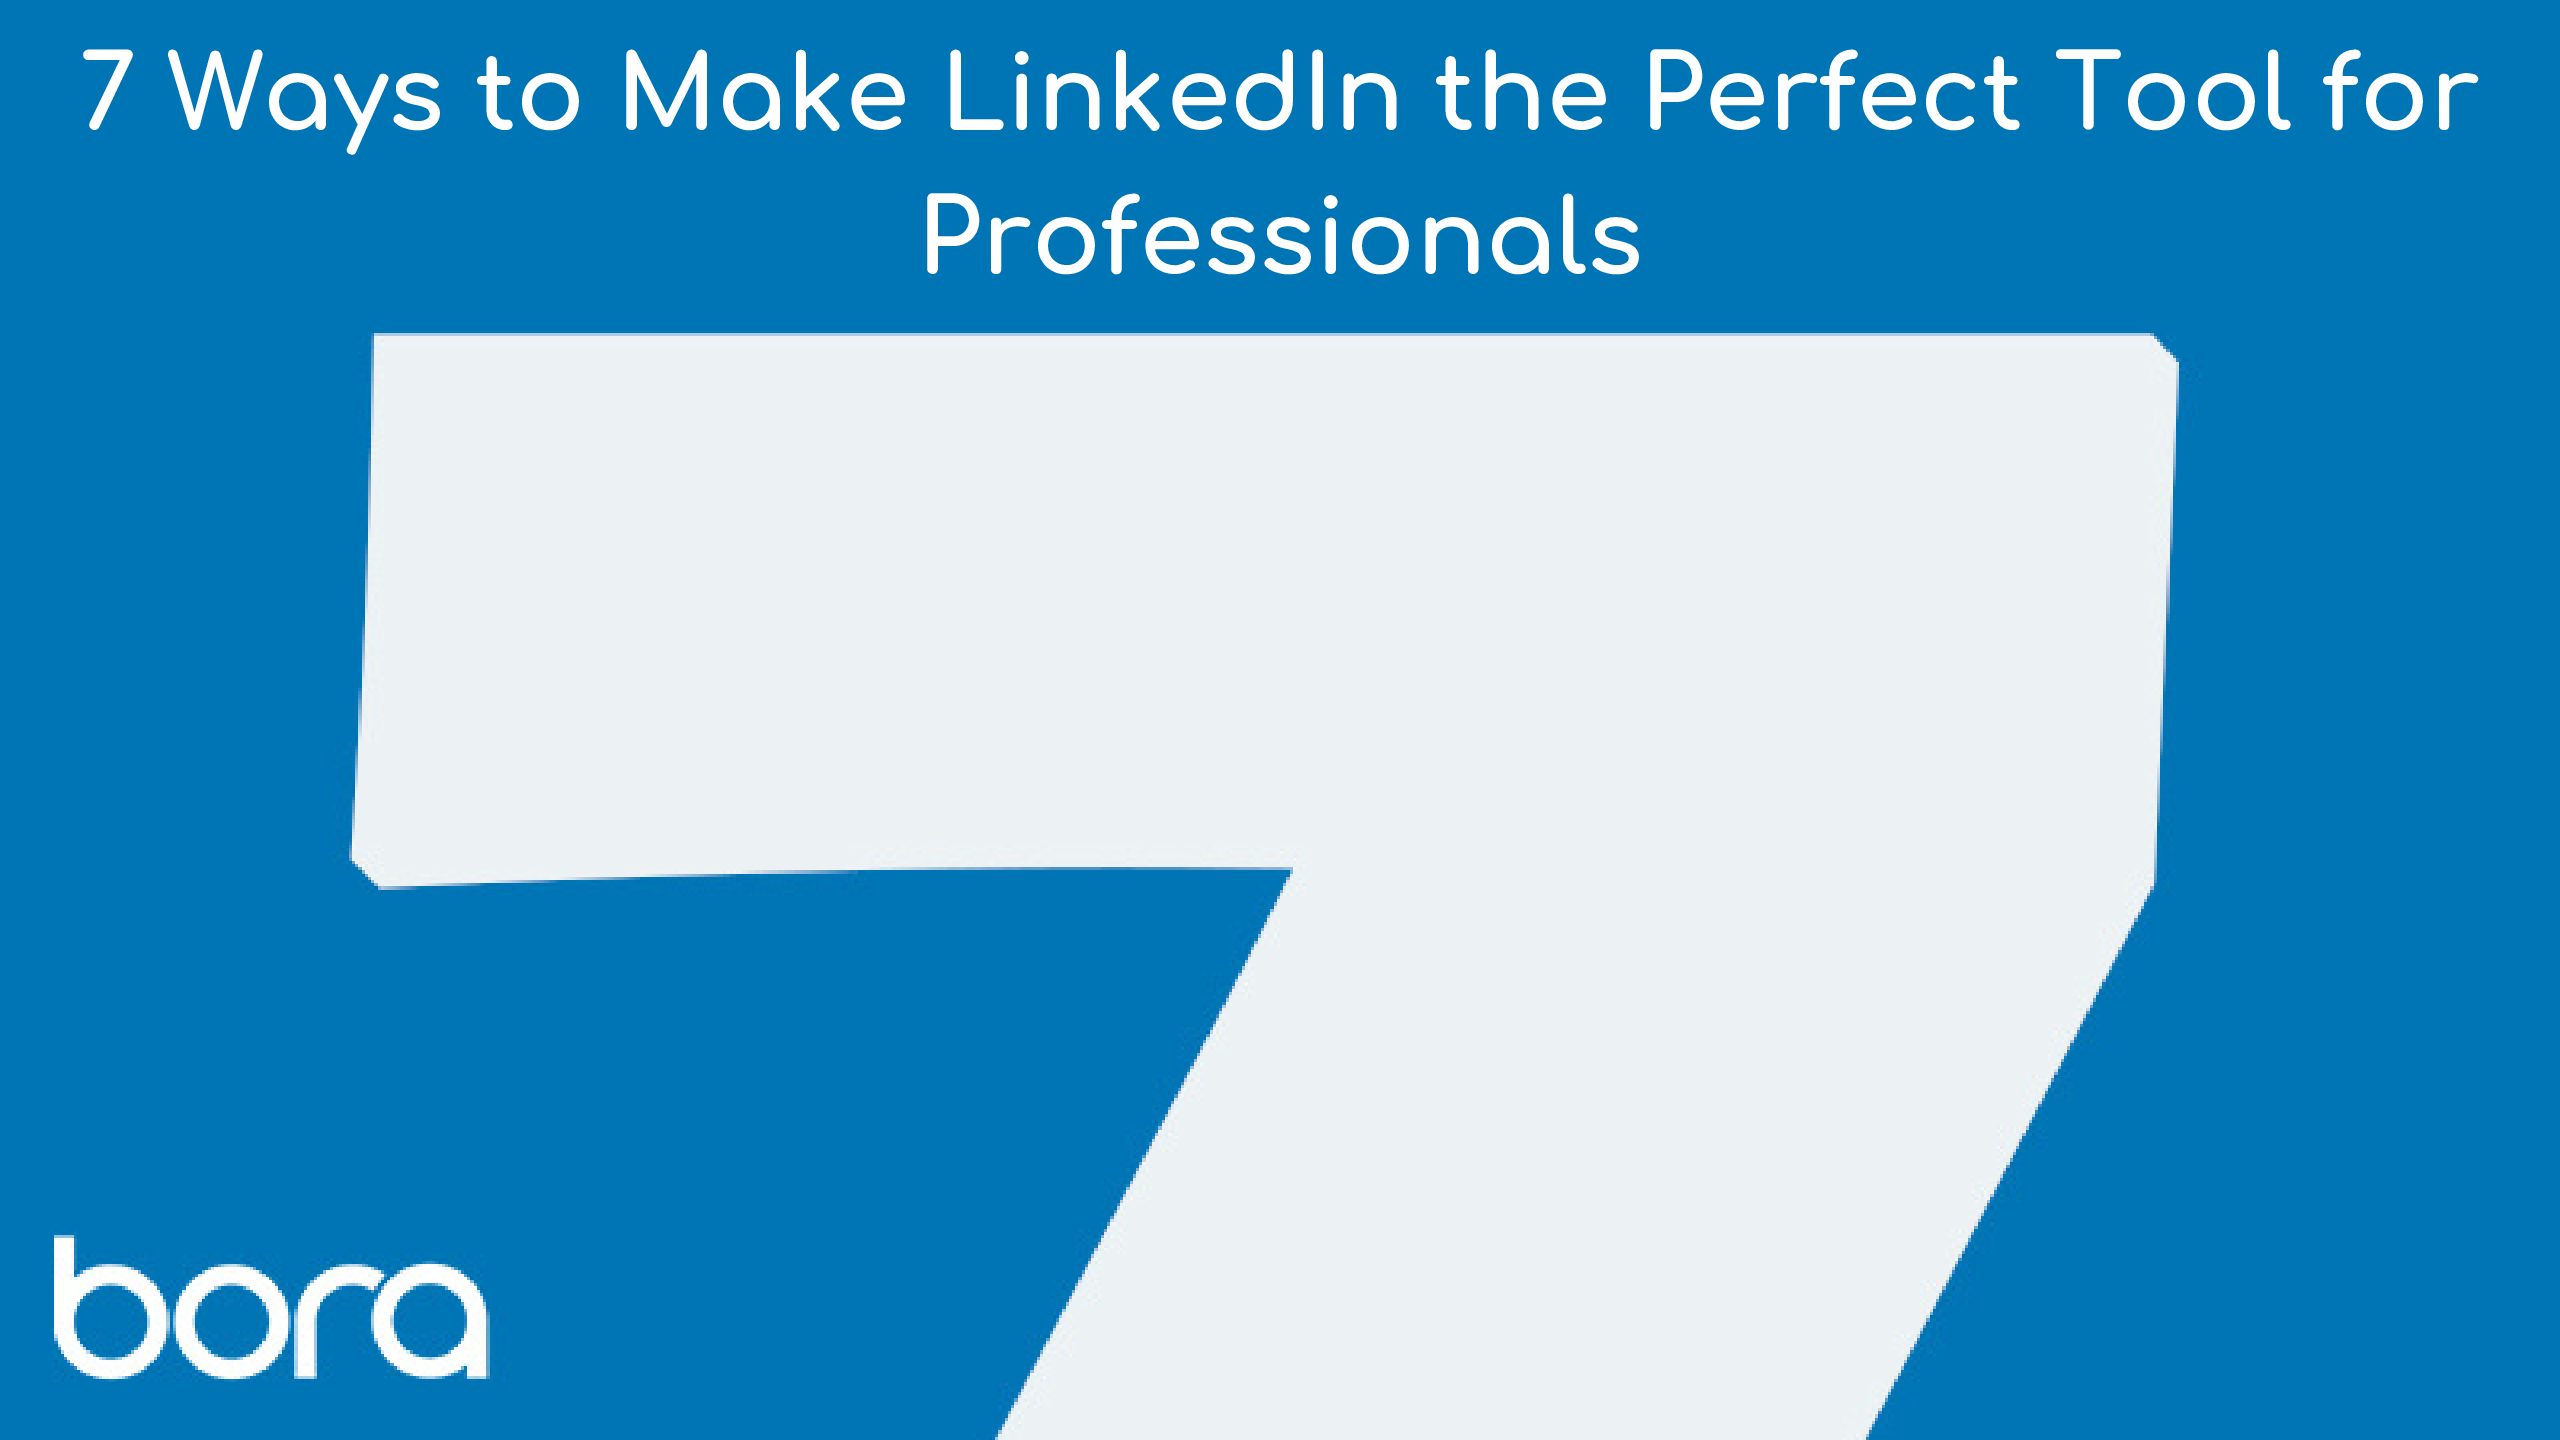 7 Ways to Make LinkedIn the Perfect Tool for Professionals